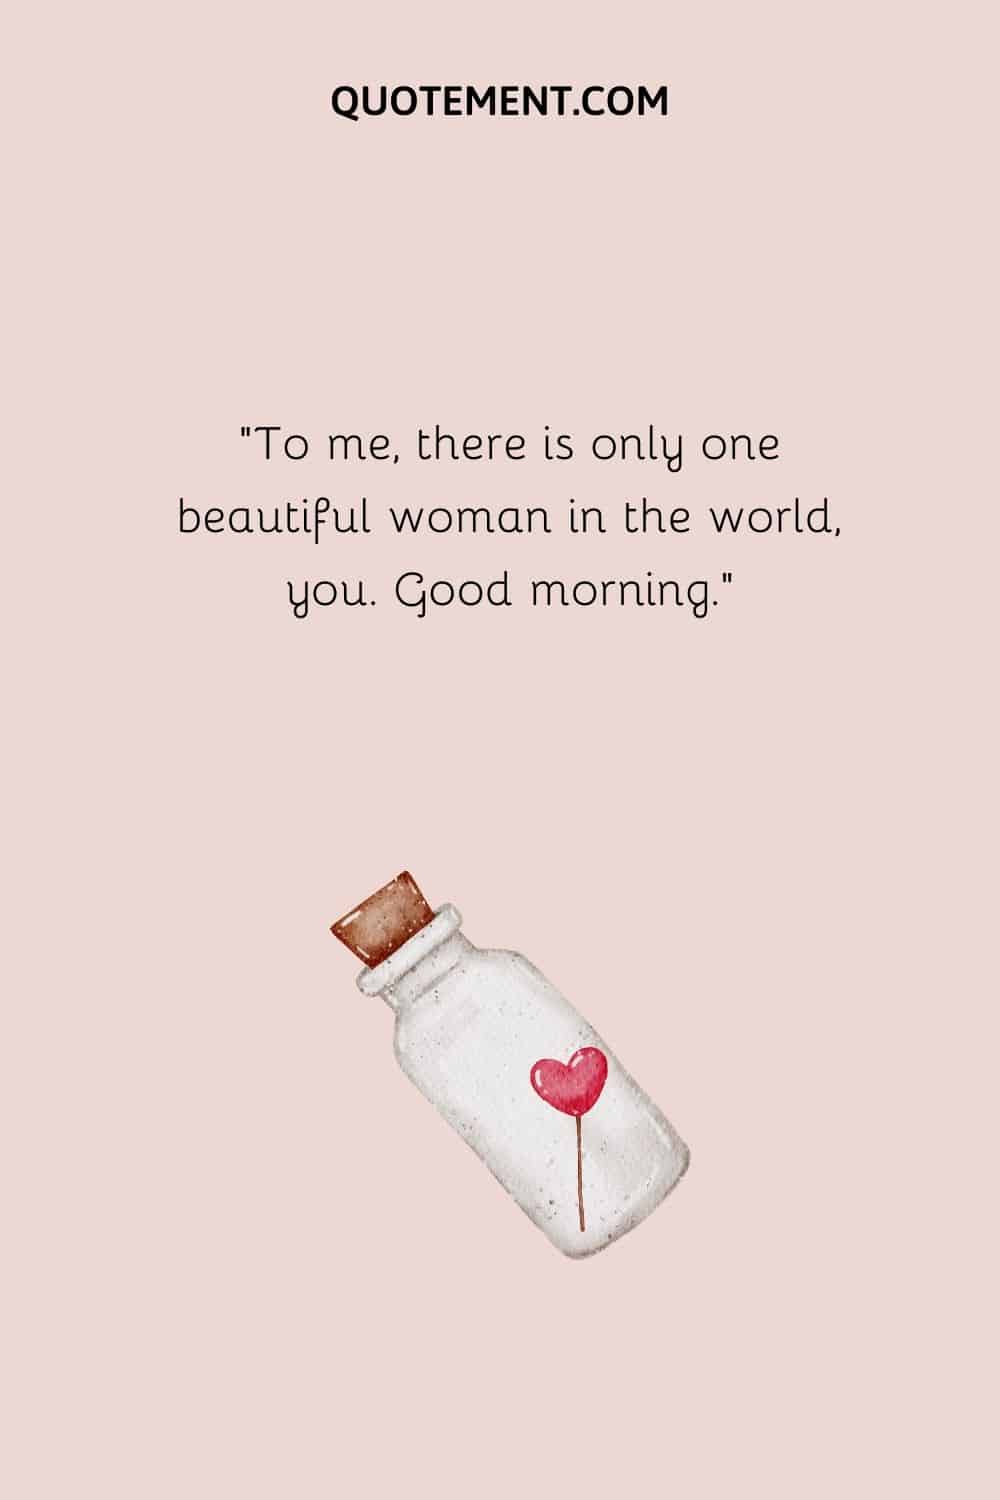 To me, there is only one beautiful woman in the world, you. Good morning.